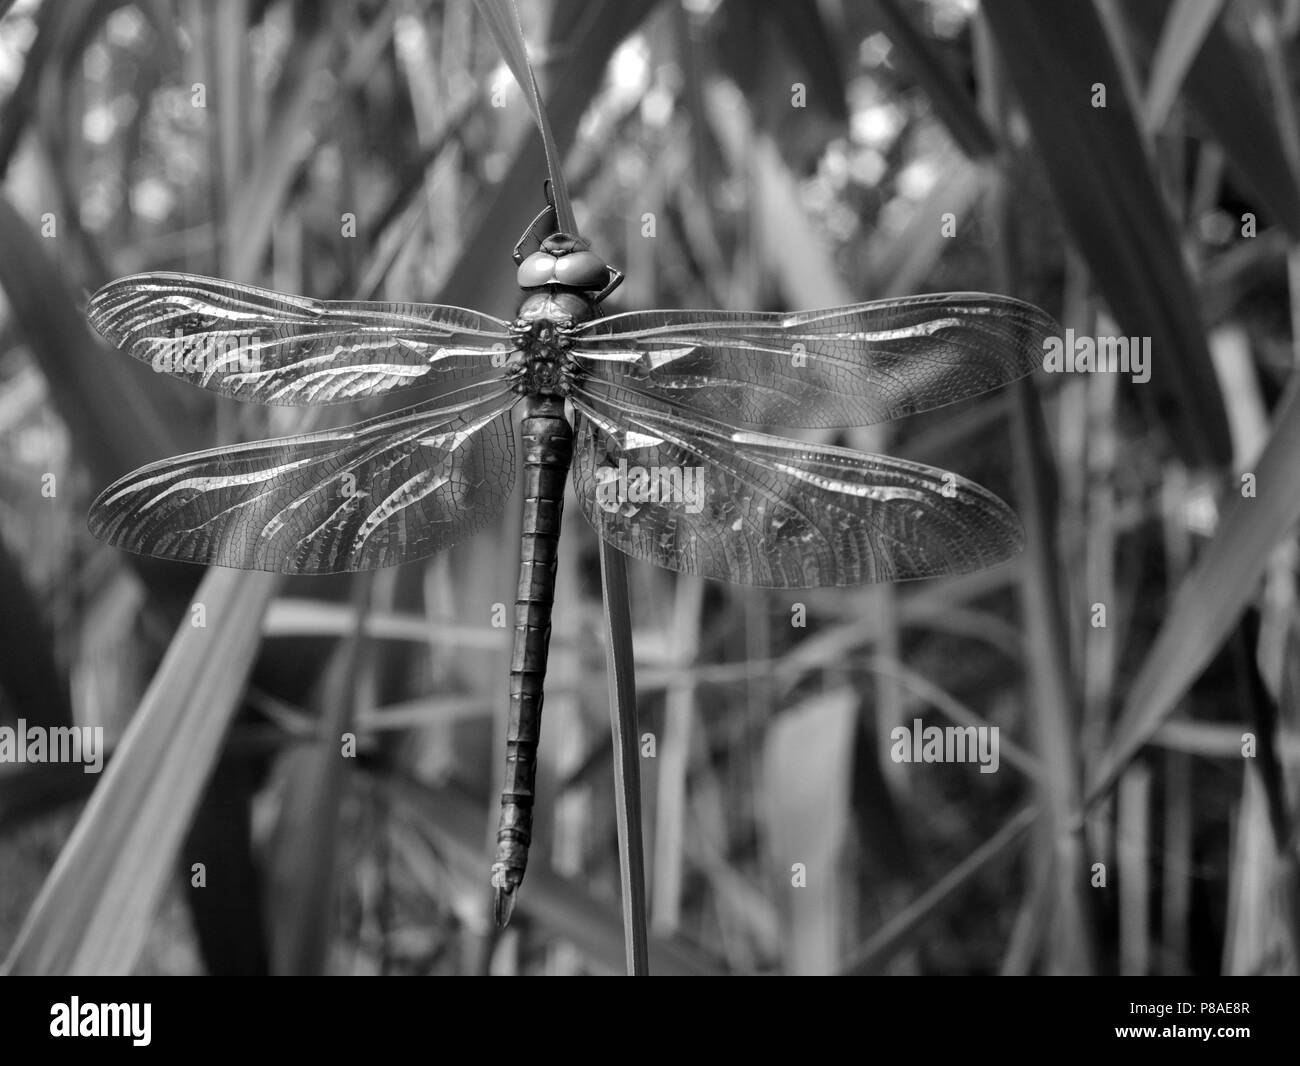 Brown Hawker Dragonfly Banque D'Images